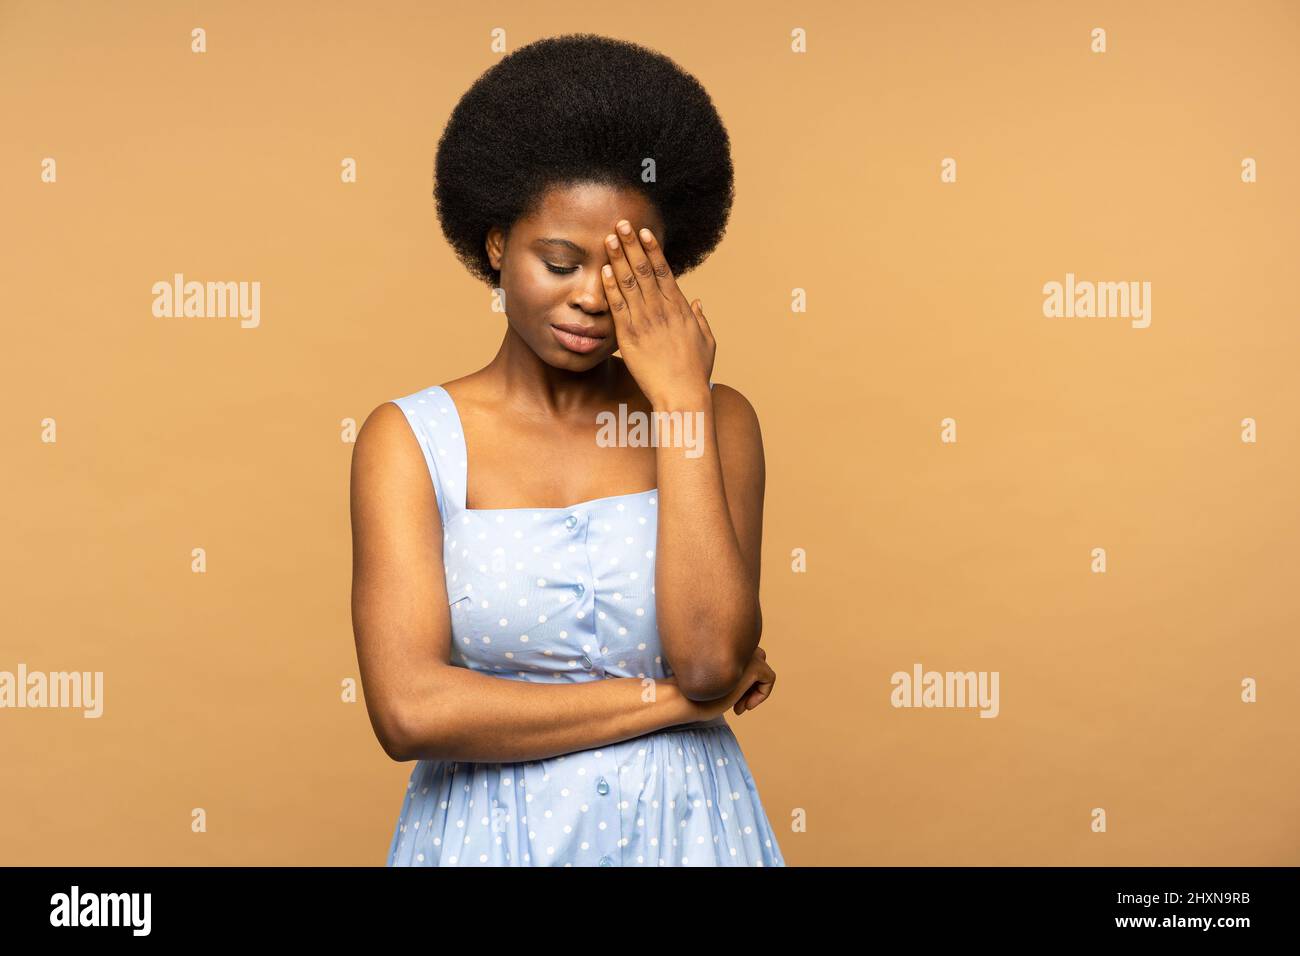 Shocked black female cover face with hand after bad news crying received bad e-mail feels unhappy Stock Photo